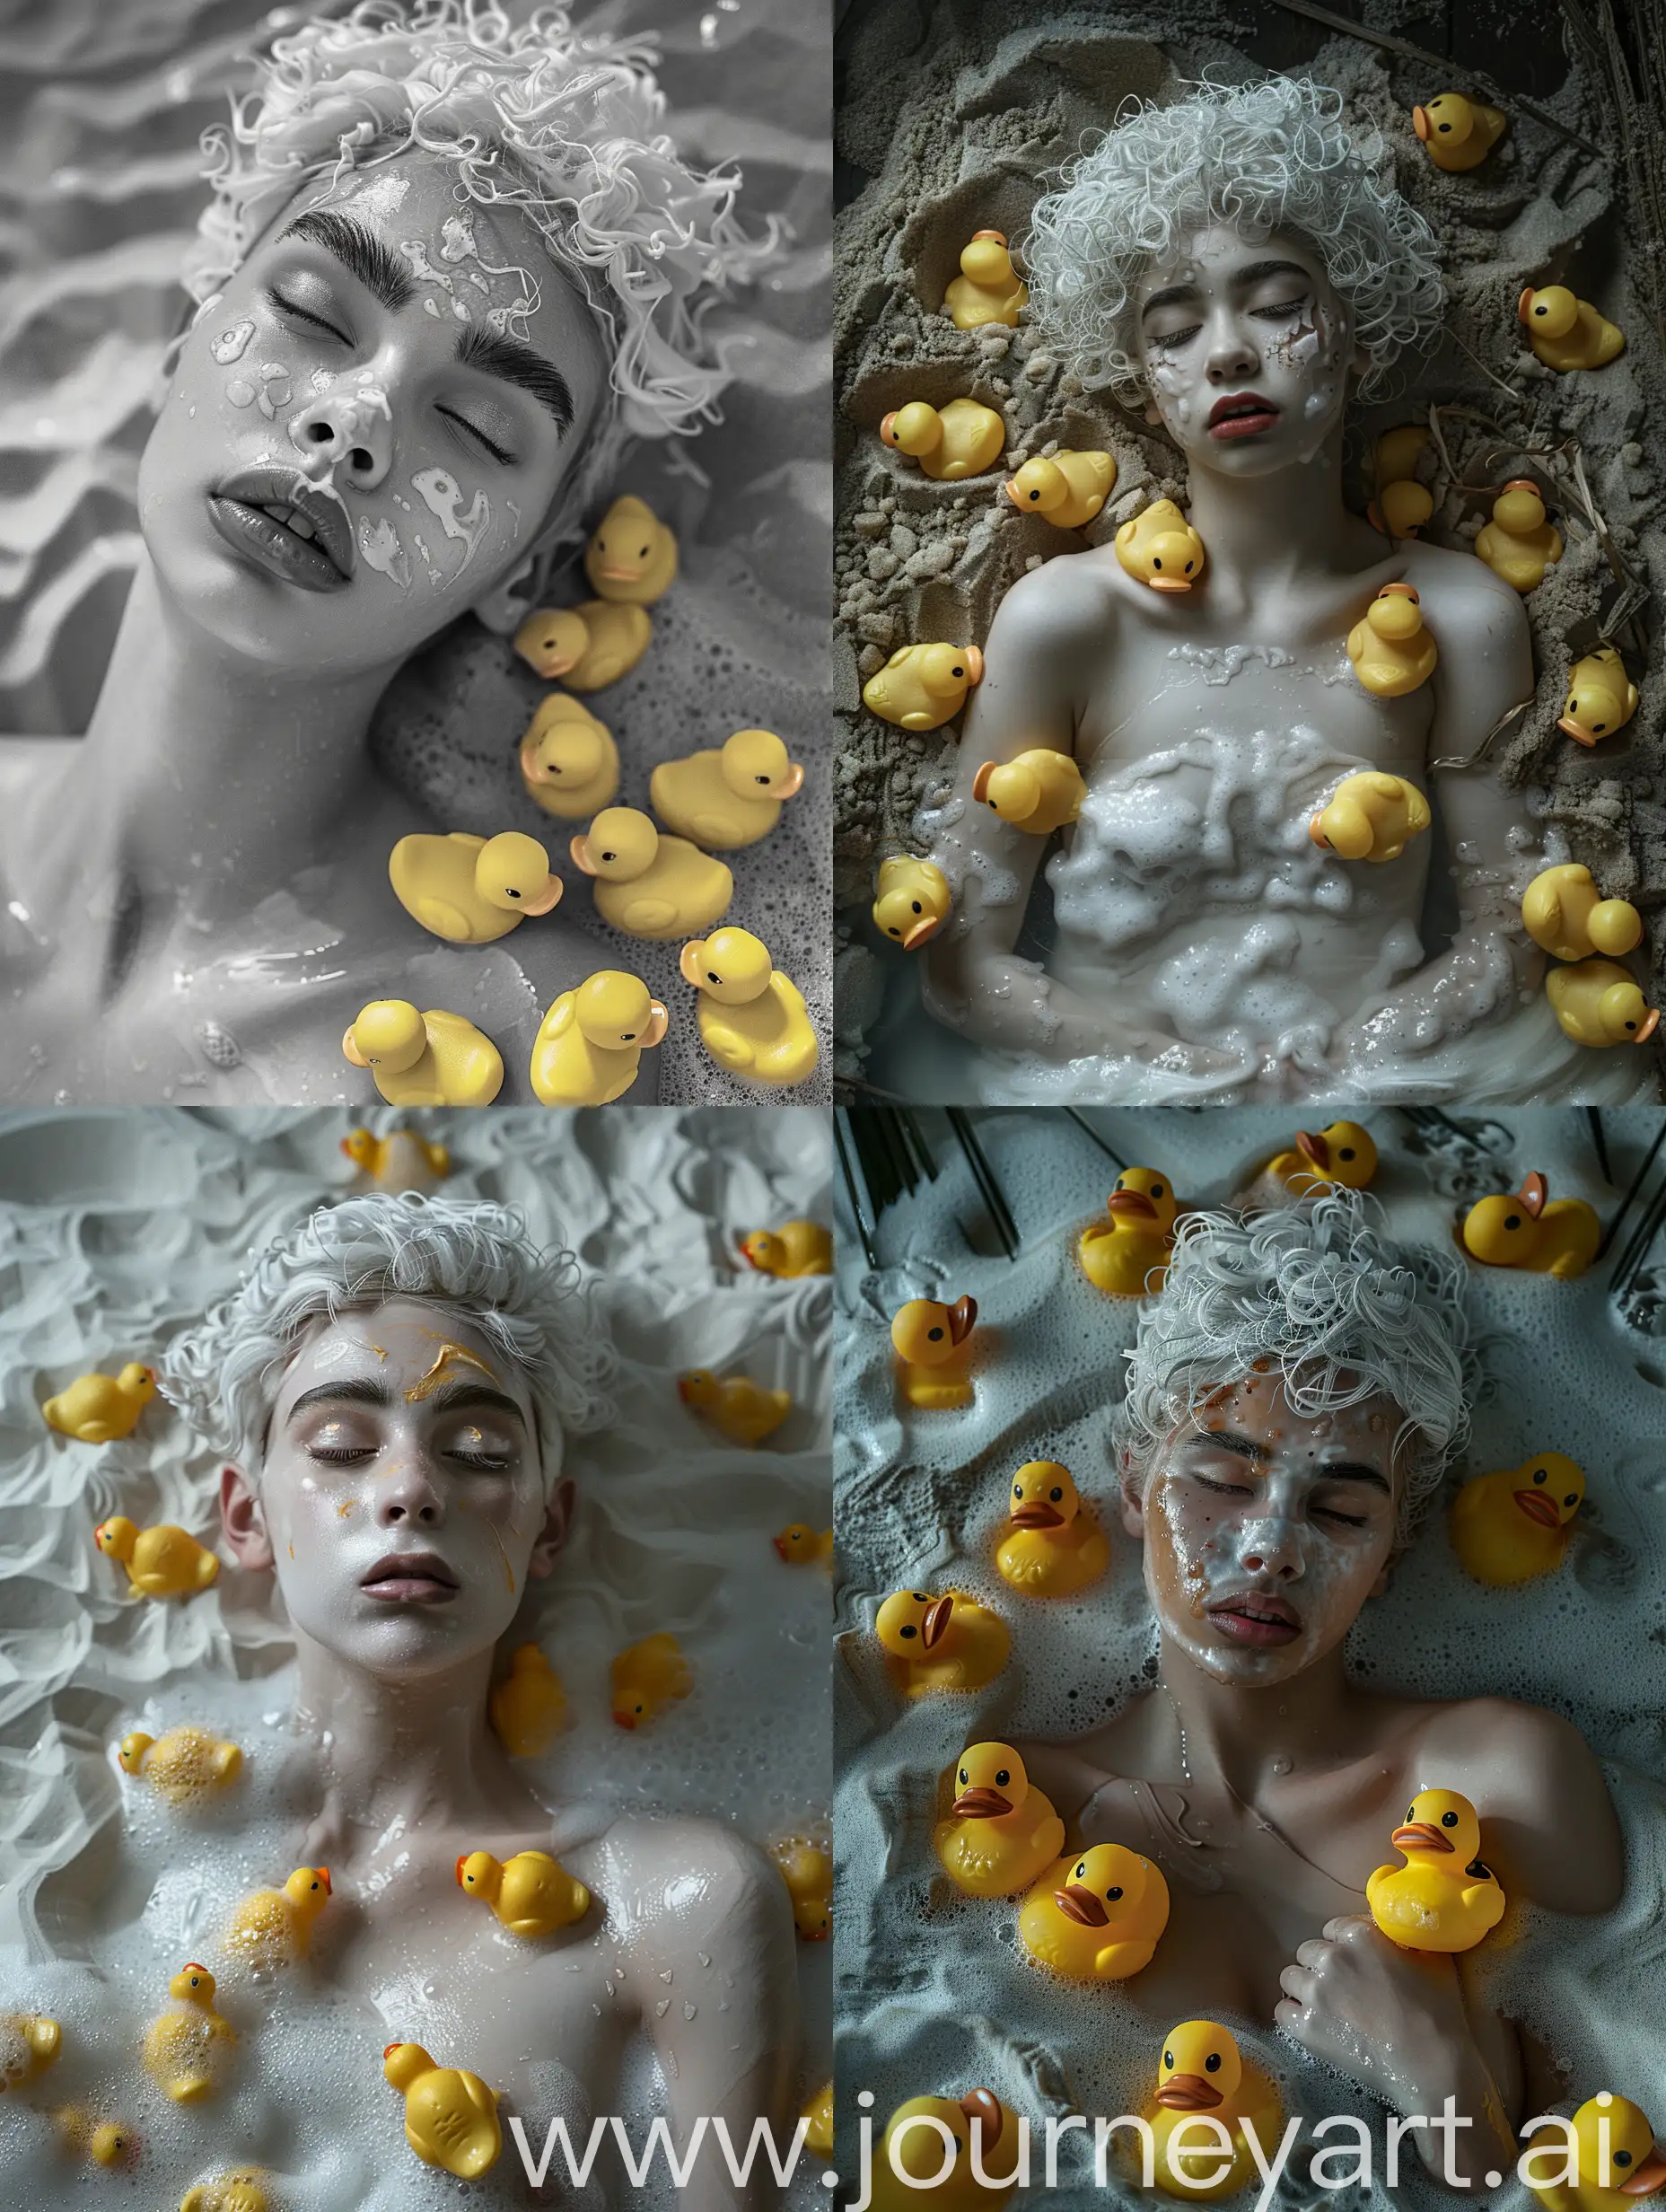 Dreamy-Portrait-Photography-Beautiful-Girl-in-Bath-with-Yellow-Rubber-Ducks